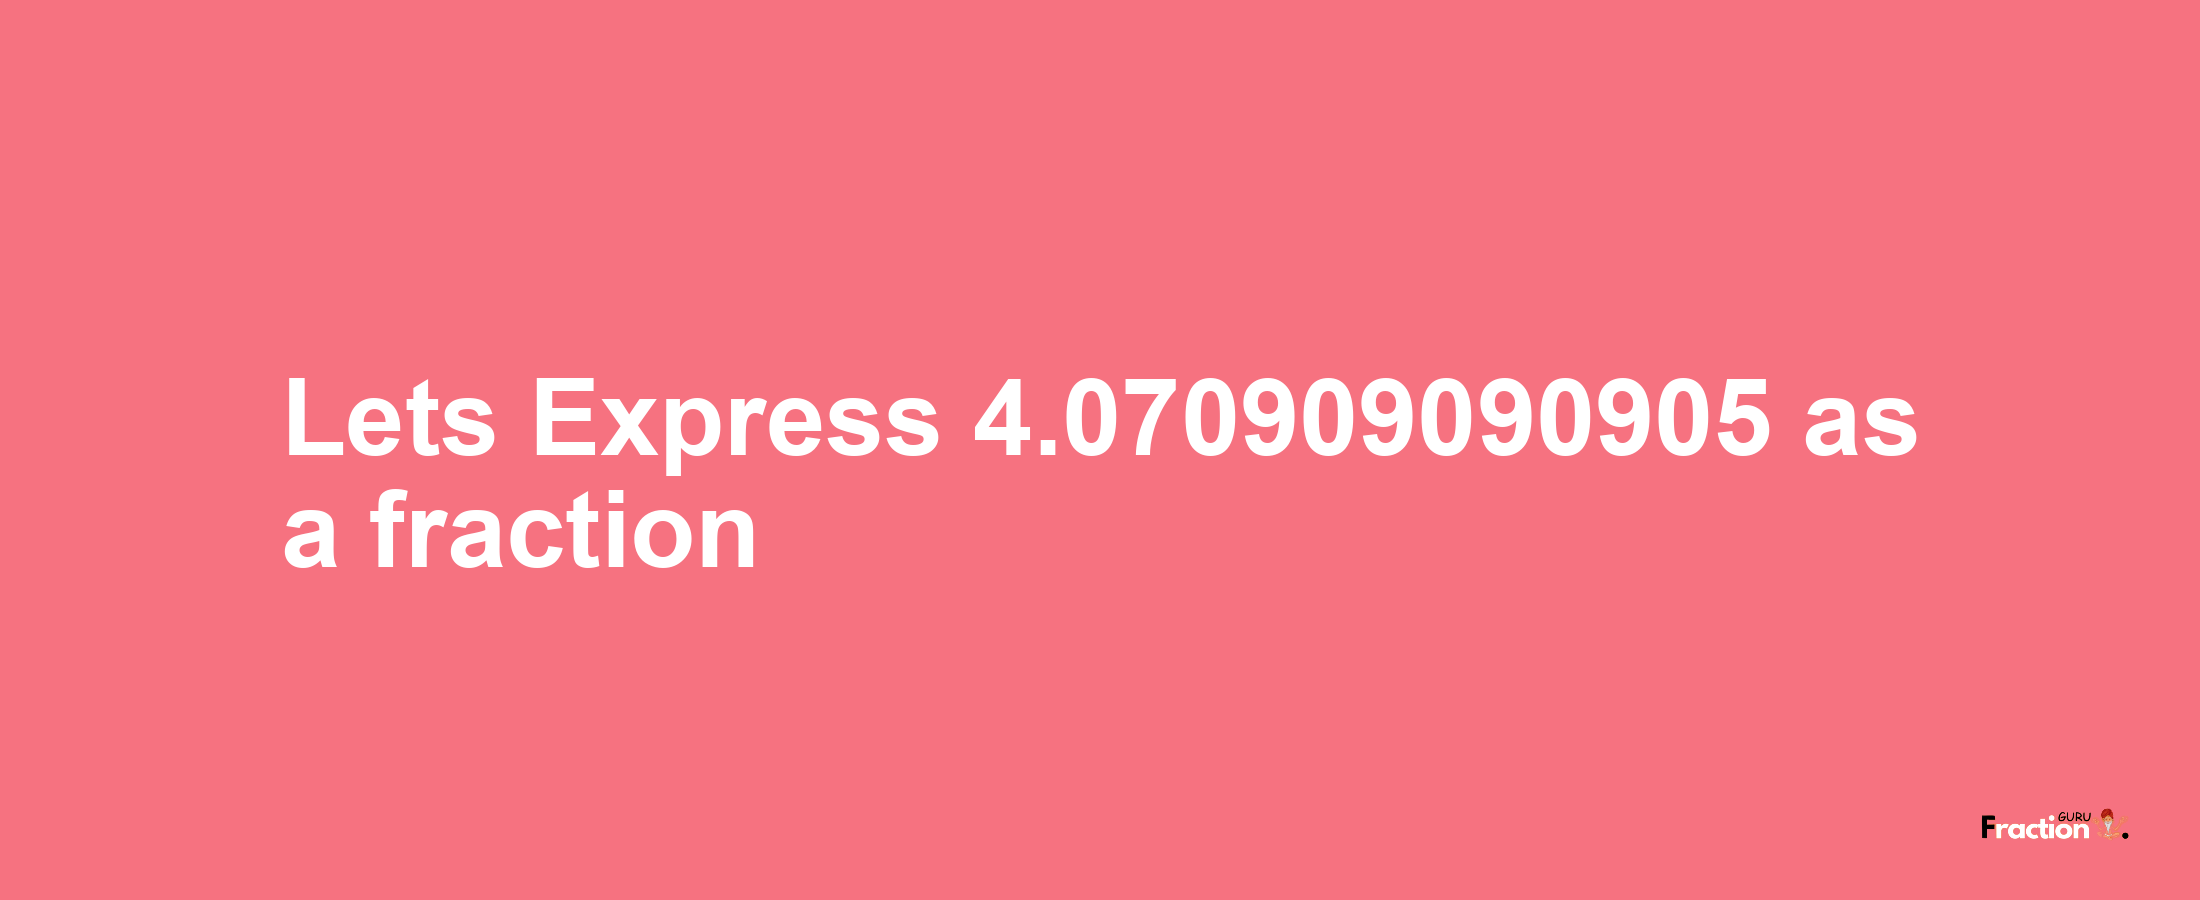 Lets Express 4.070909090905 as afraction